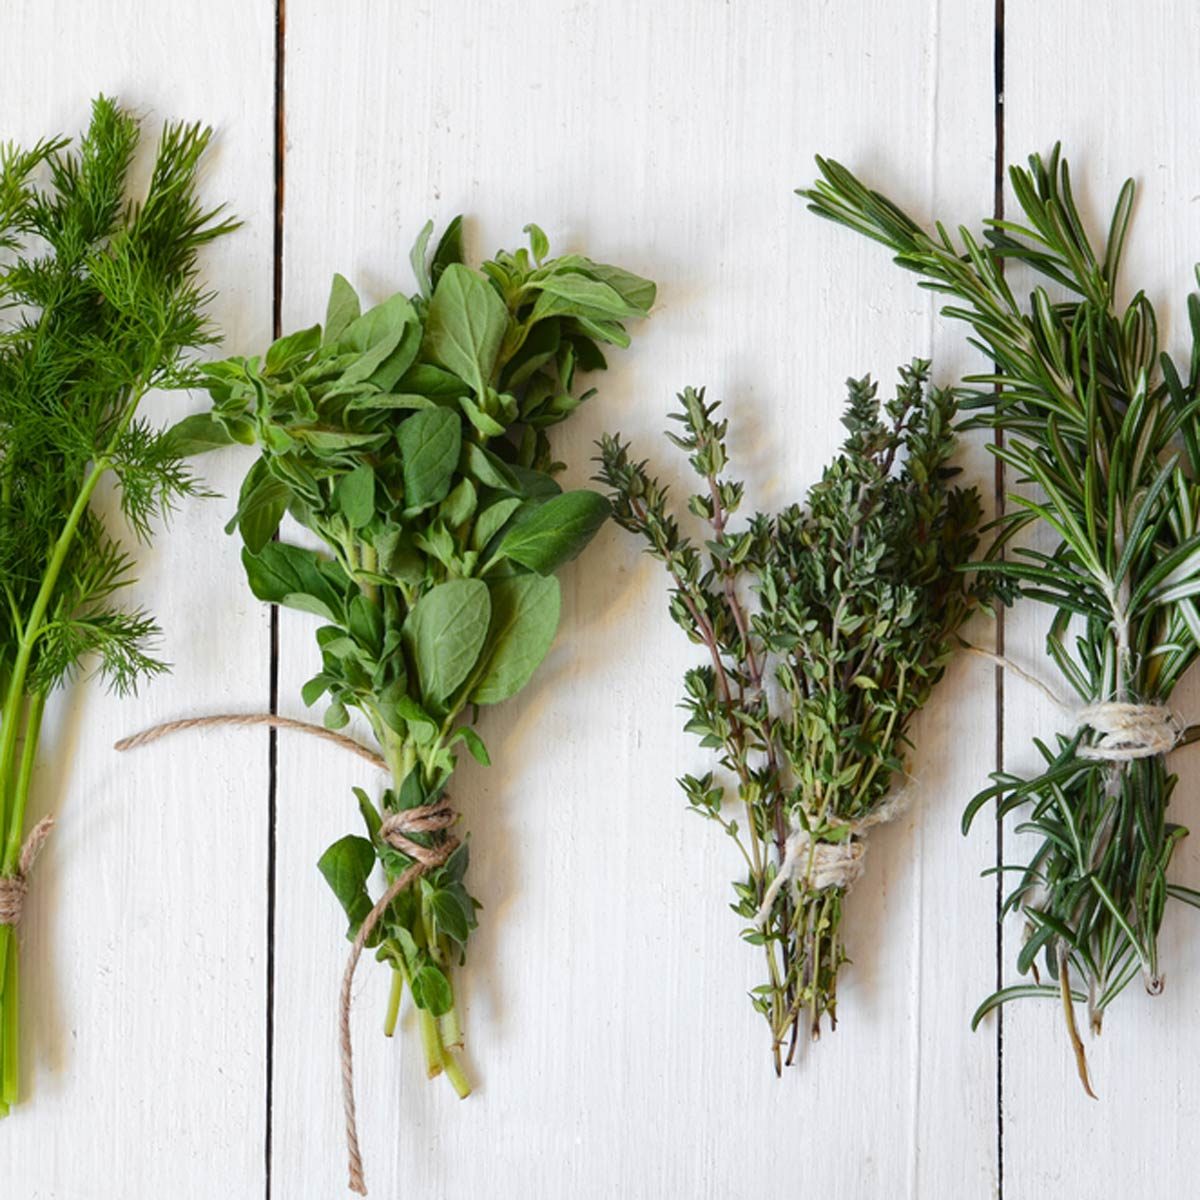 How to Dry Fresh Herbs